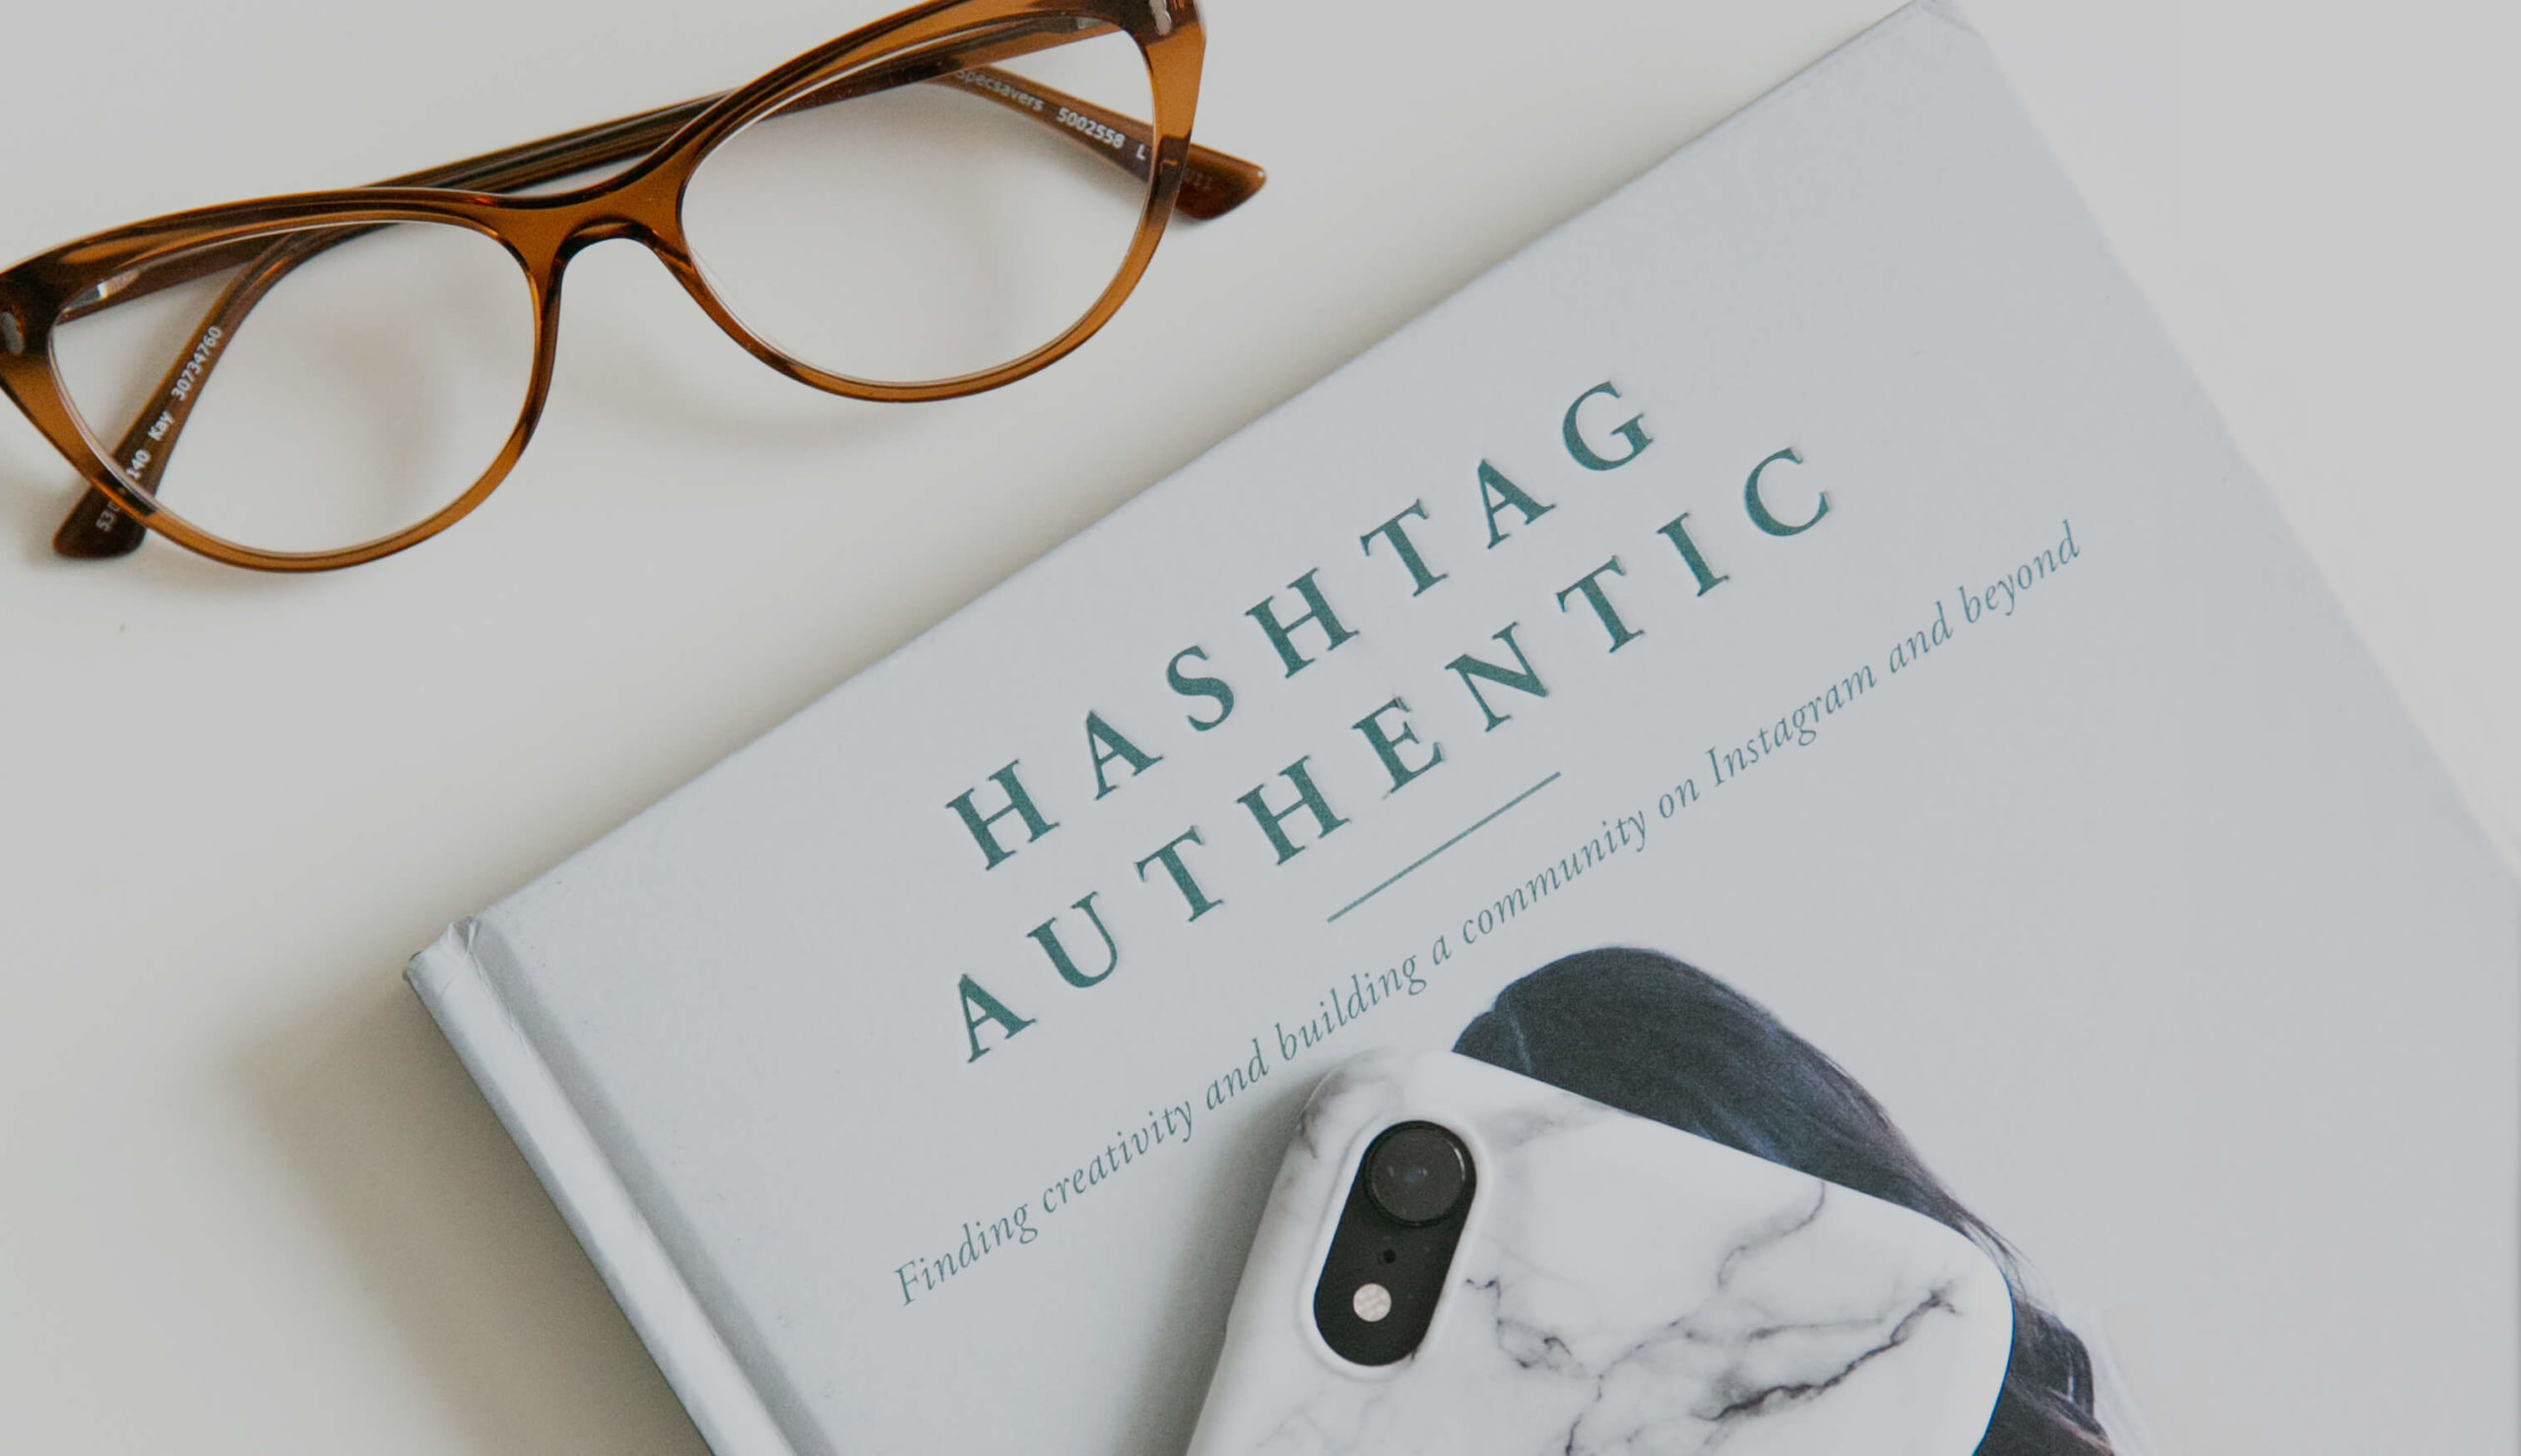 Hashtag book with iPhone and glasses